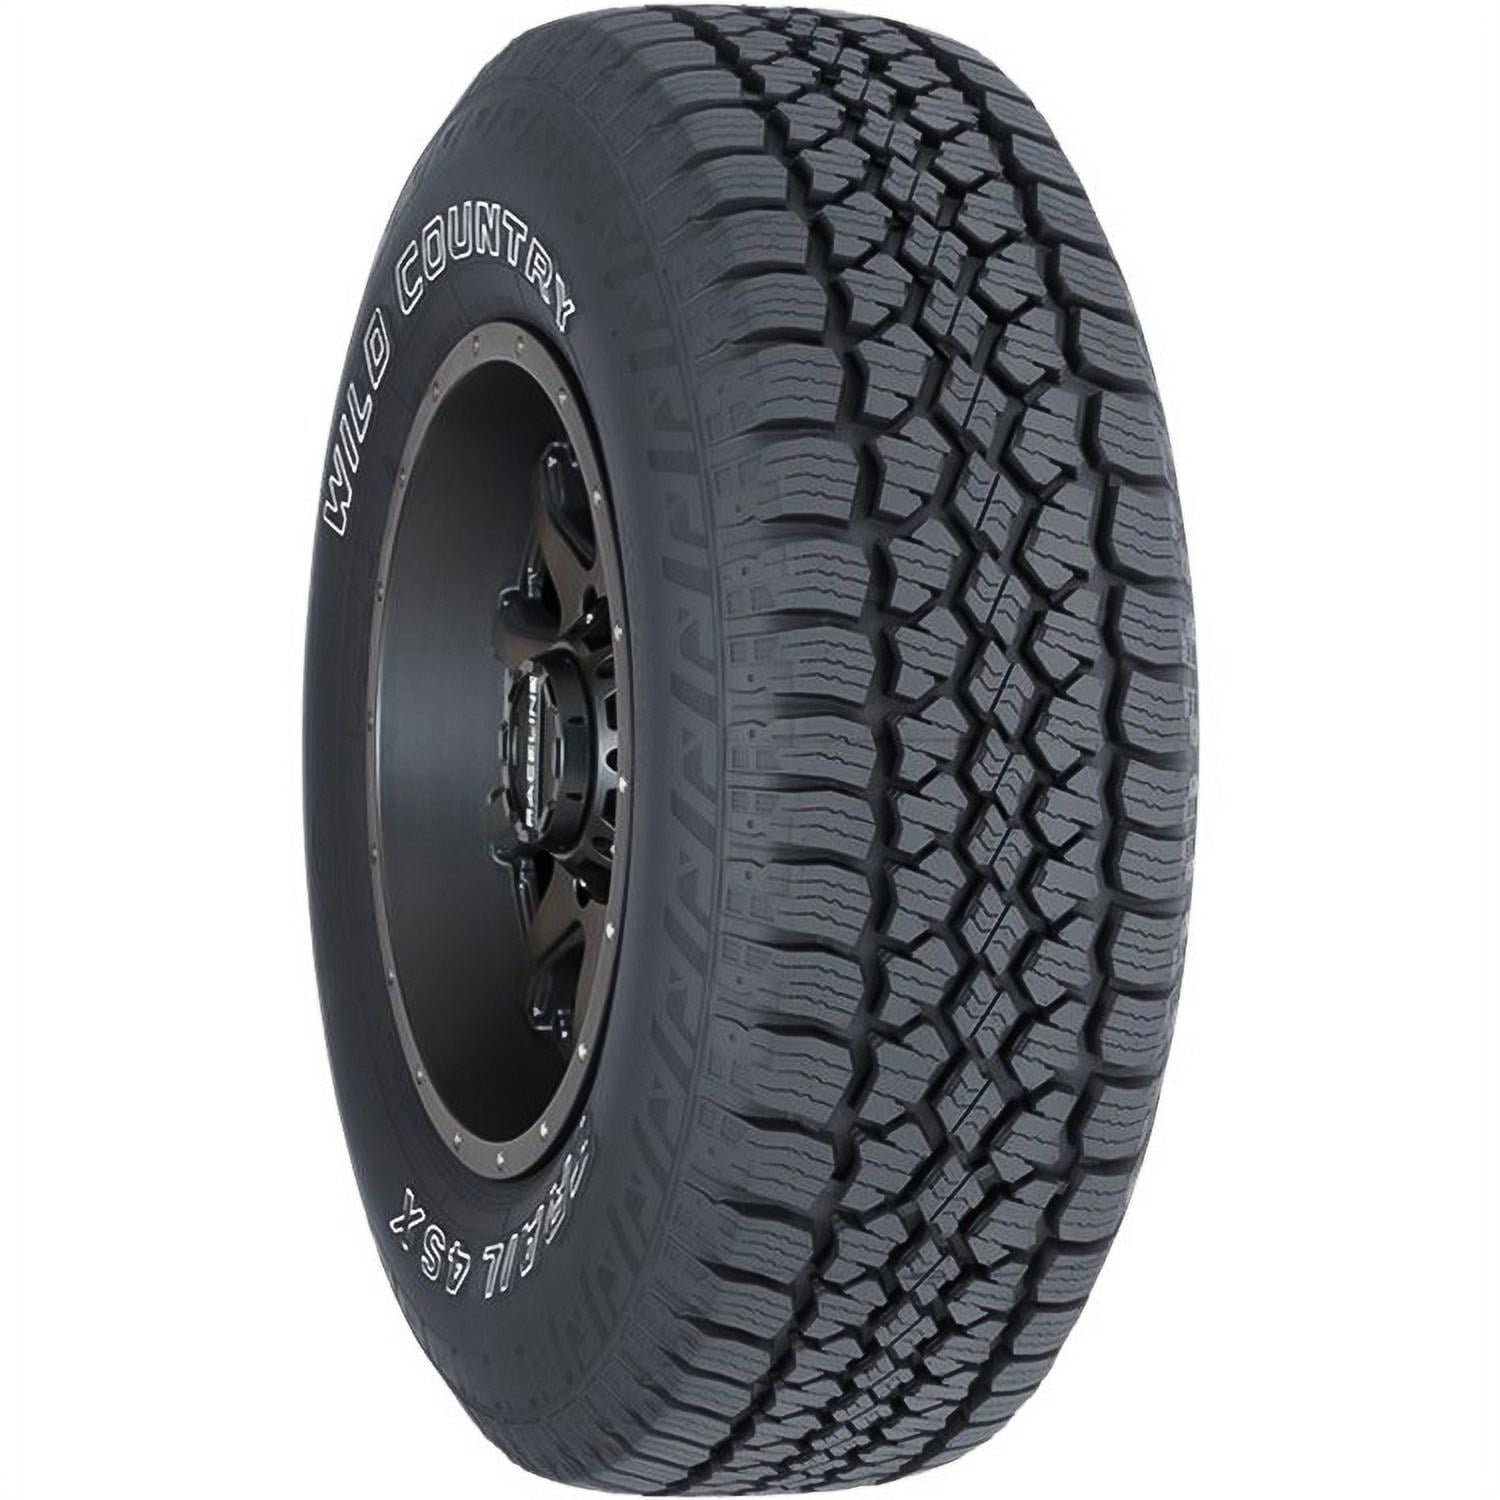 235/70-16 MultiMile Wild Country Sport XHT 106S Tire OWL